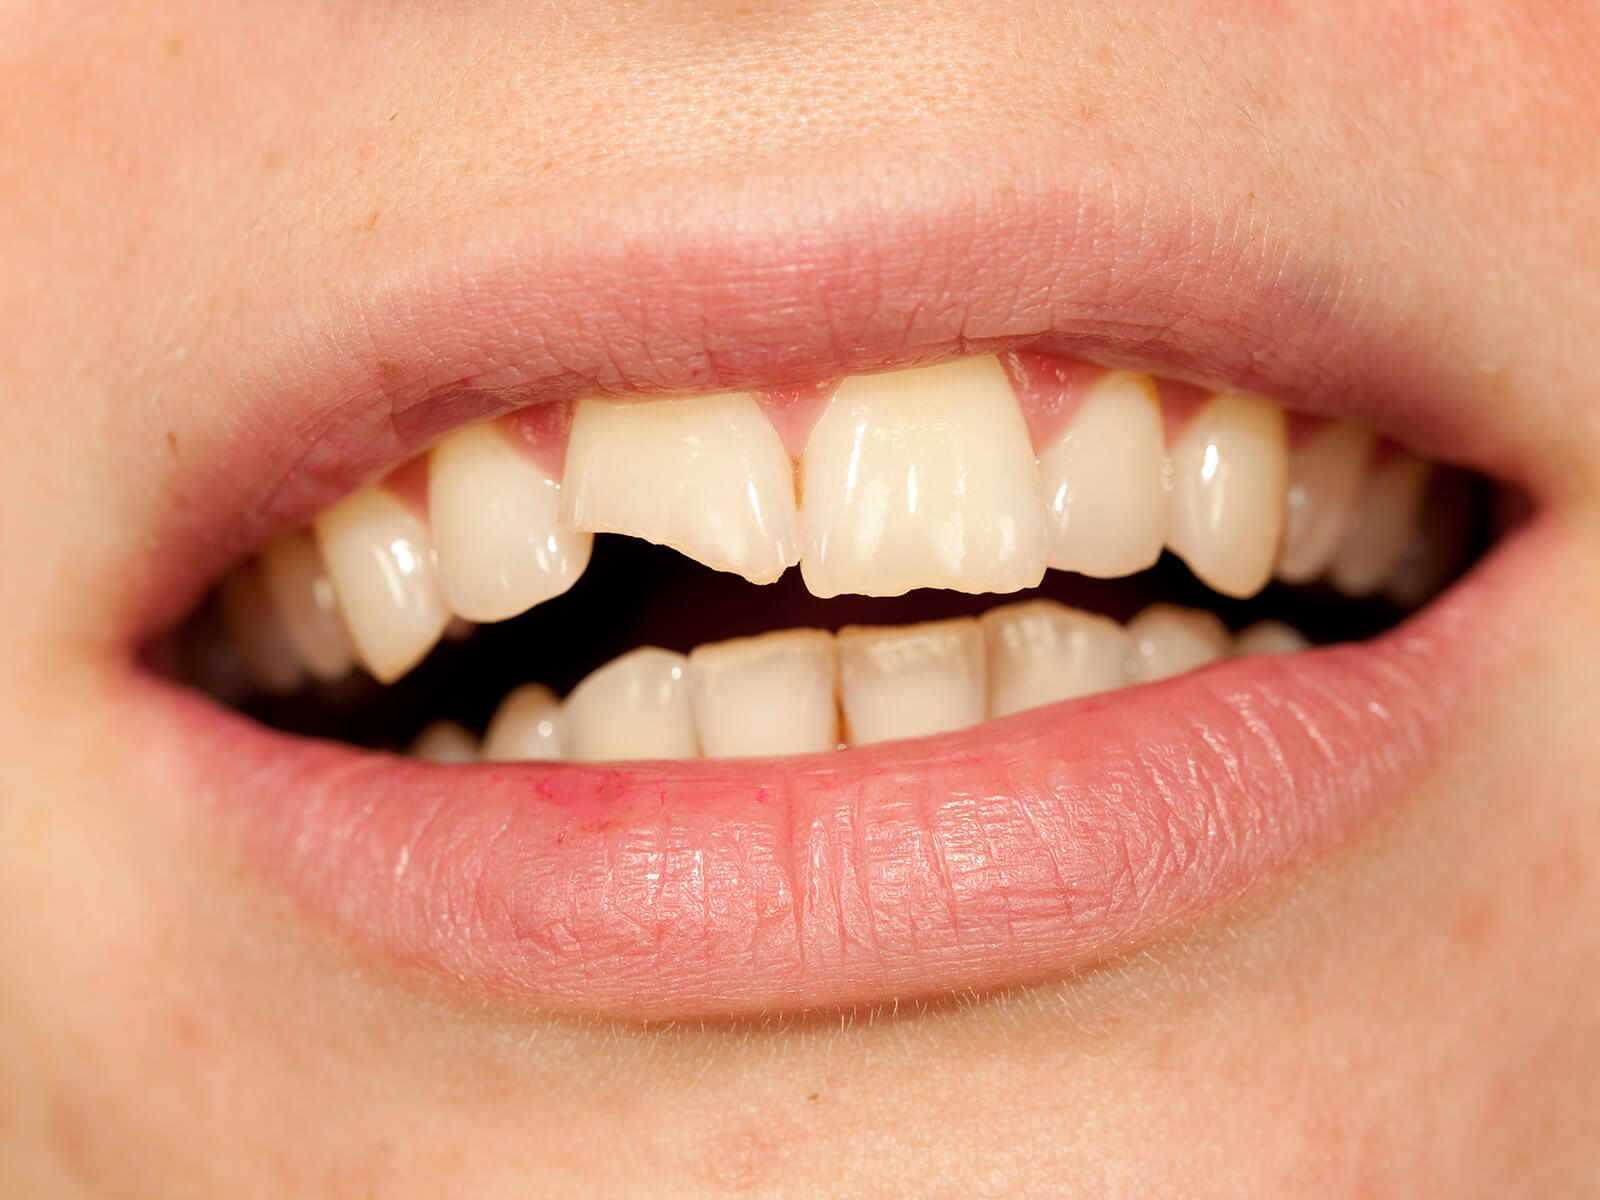 What Treatments Are Available for Broken Teeth?